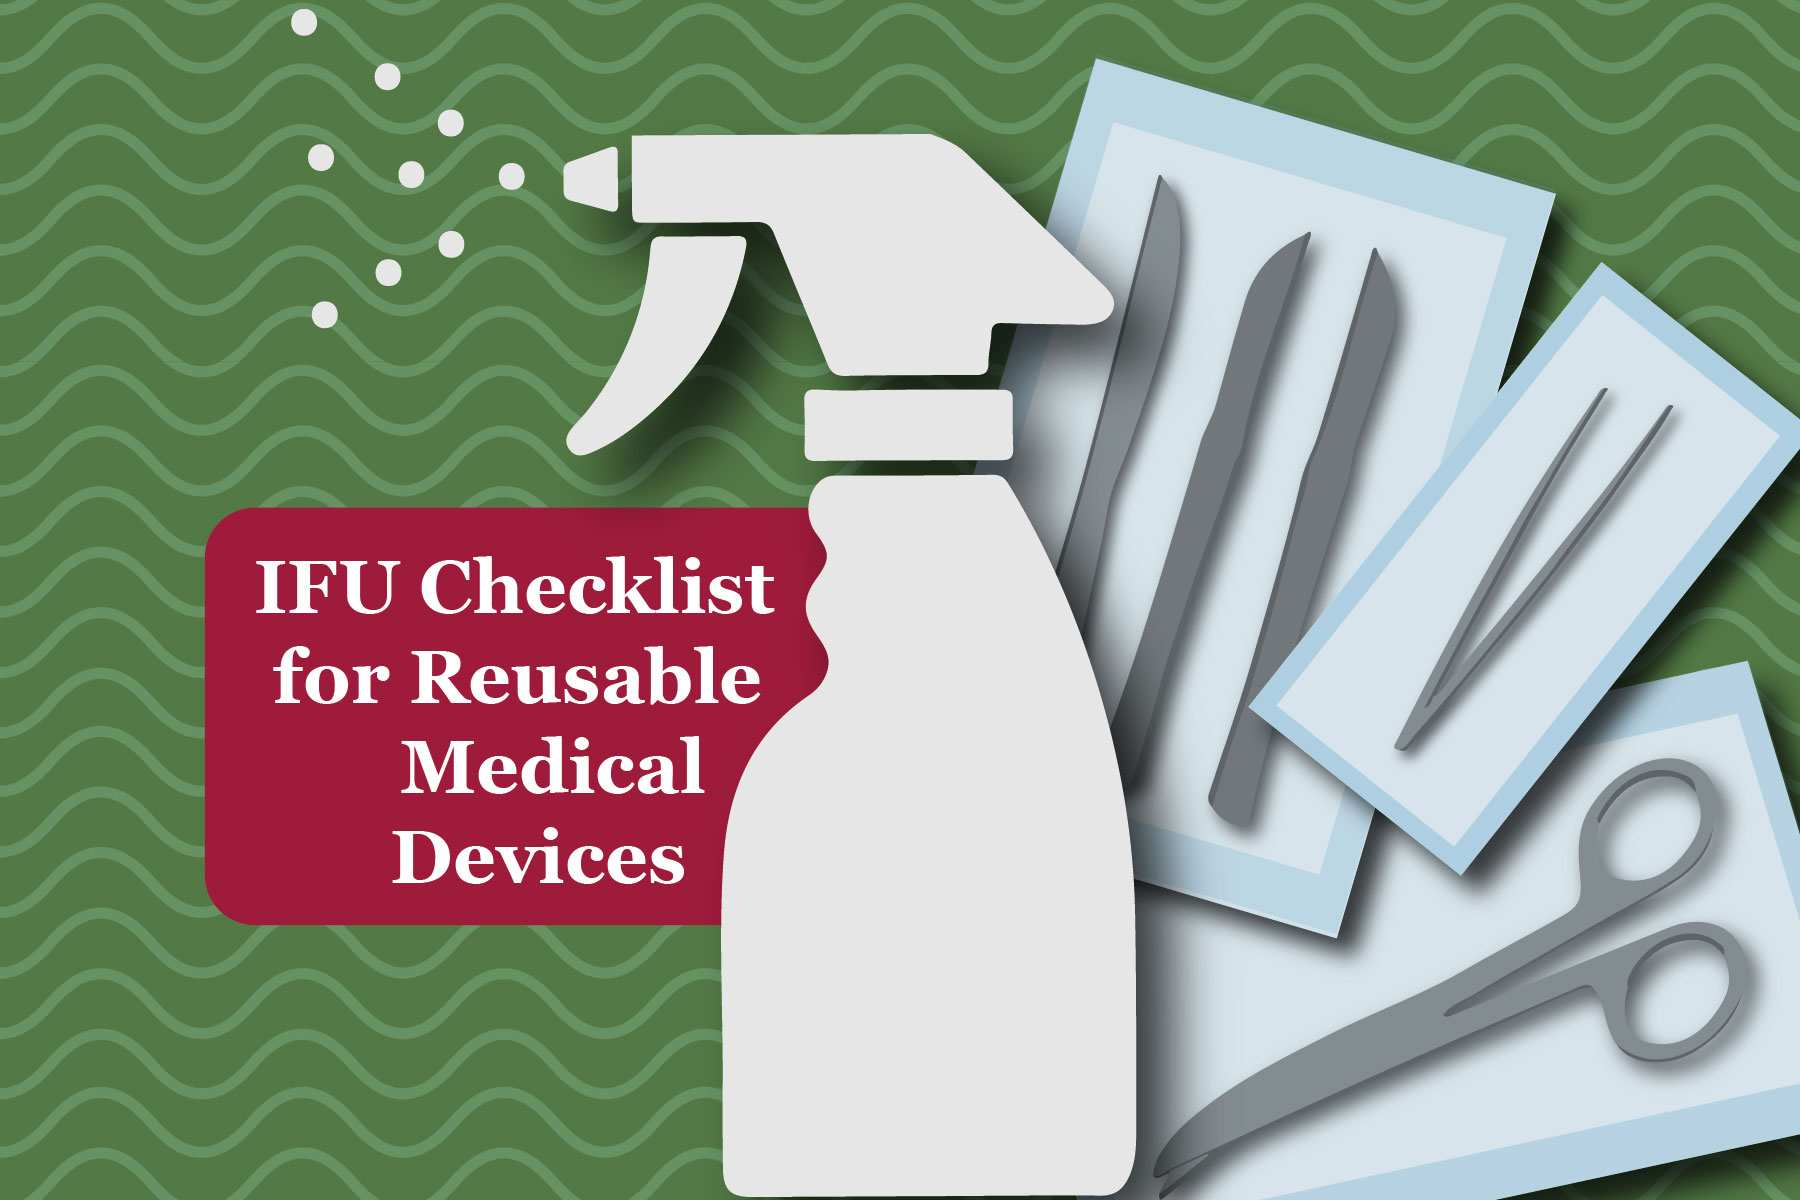 reusable medical devices that are now under the IFU checklist